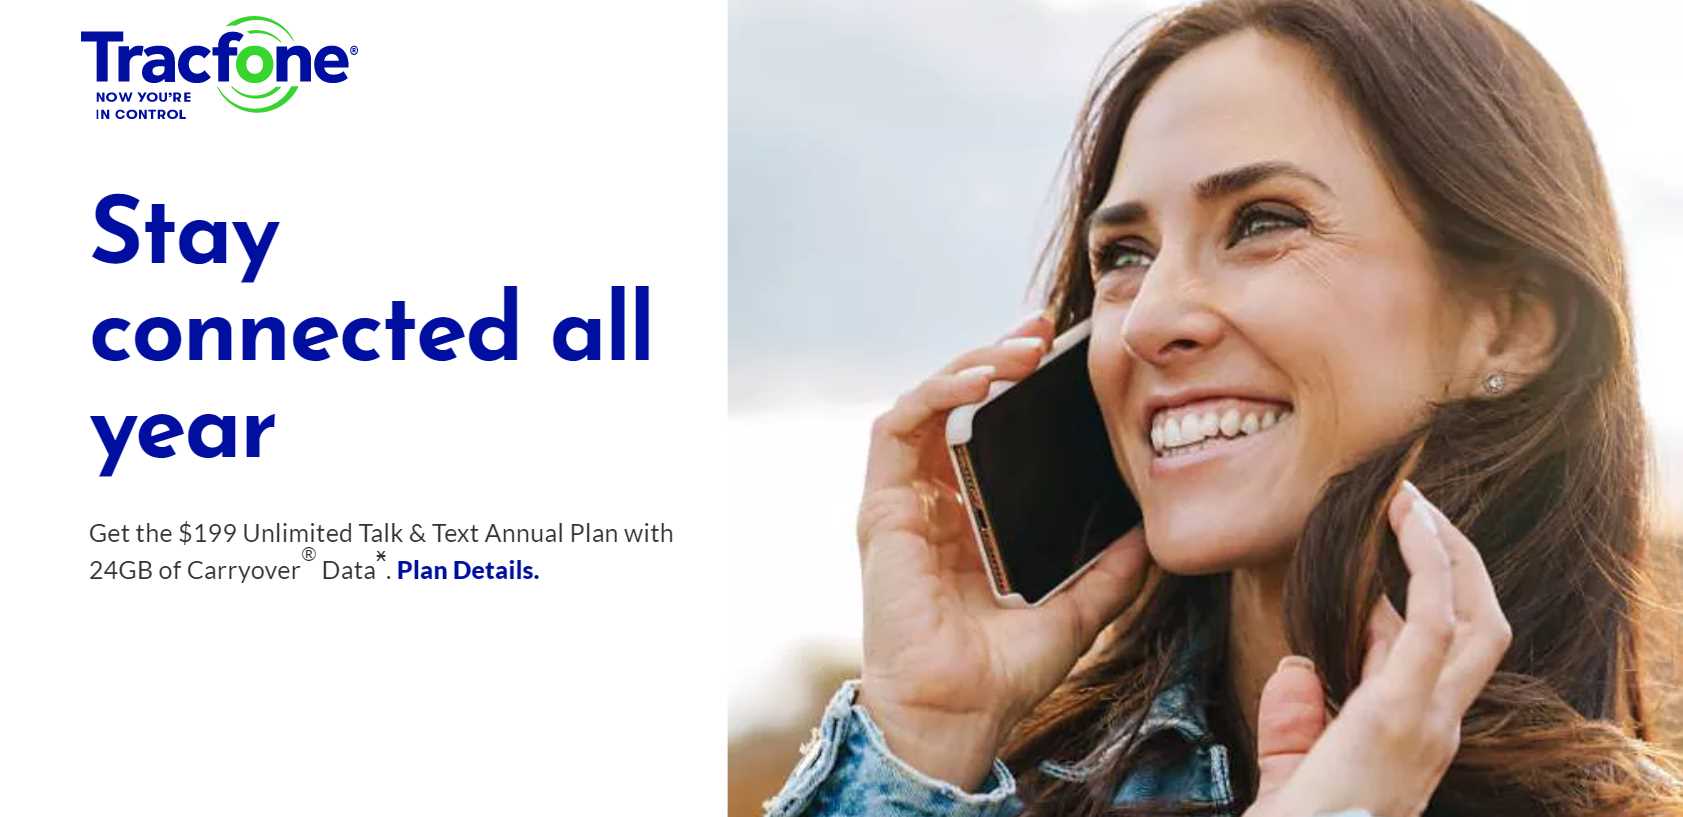 Tracfone Updates Plans With More Data